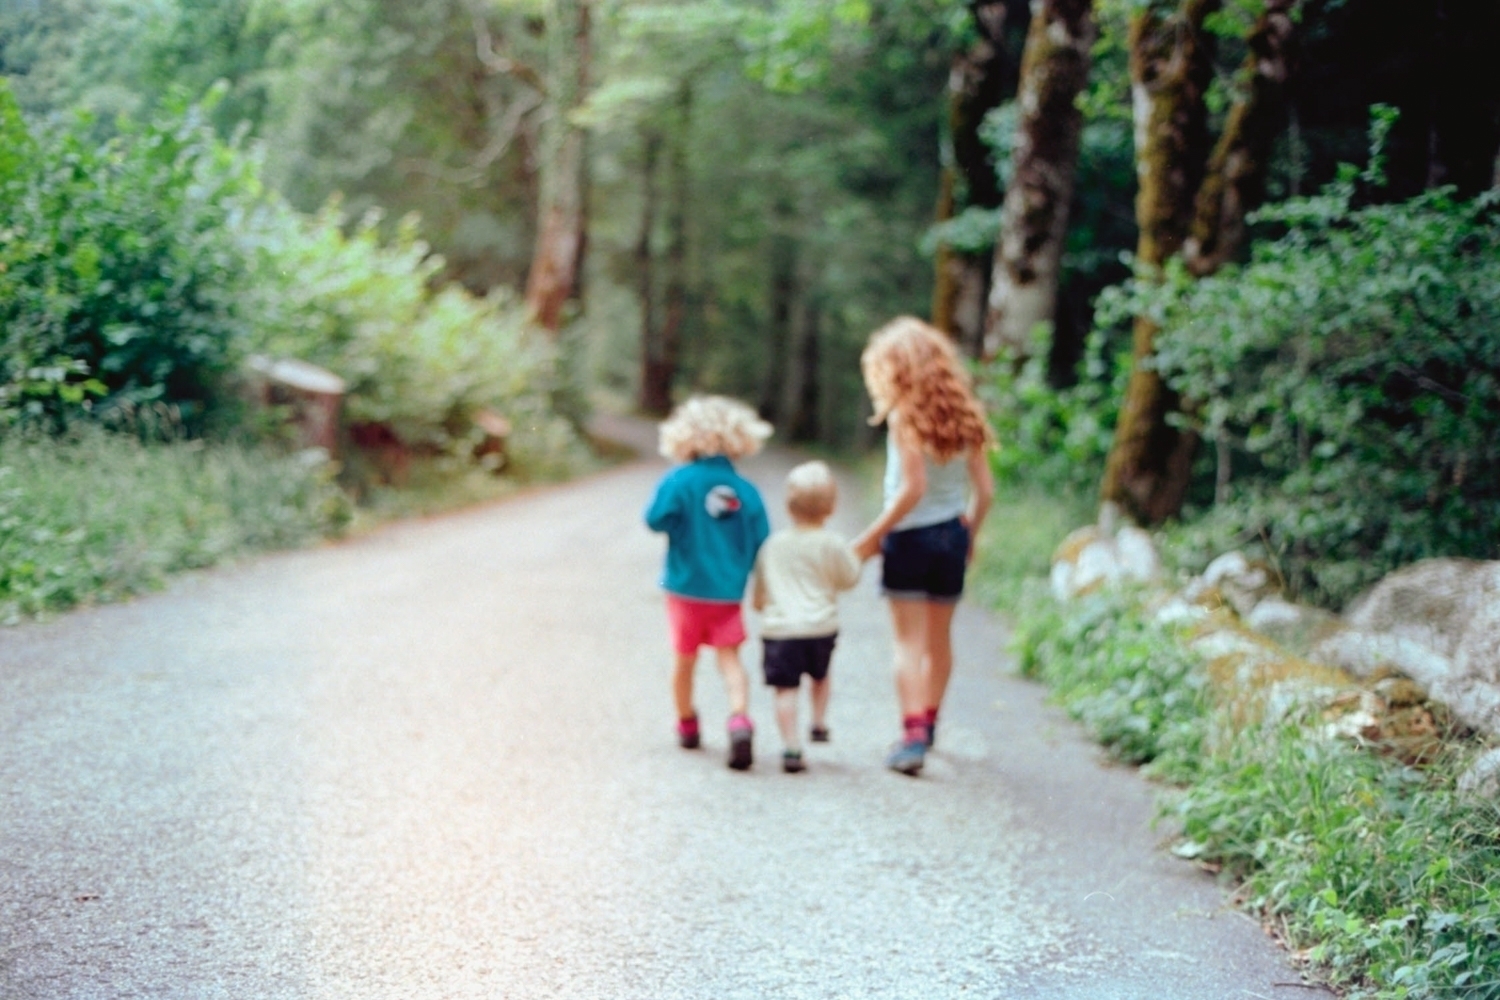 Three little kids out of focus walking ahead on an empty road in a forest, holding hands